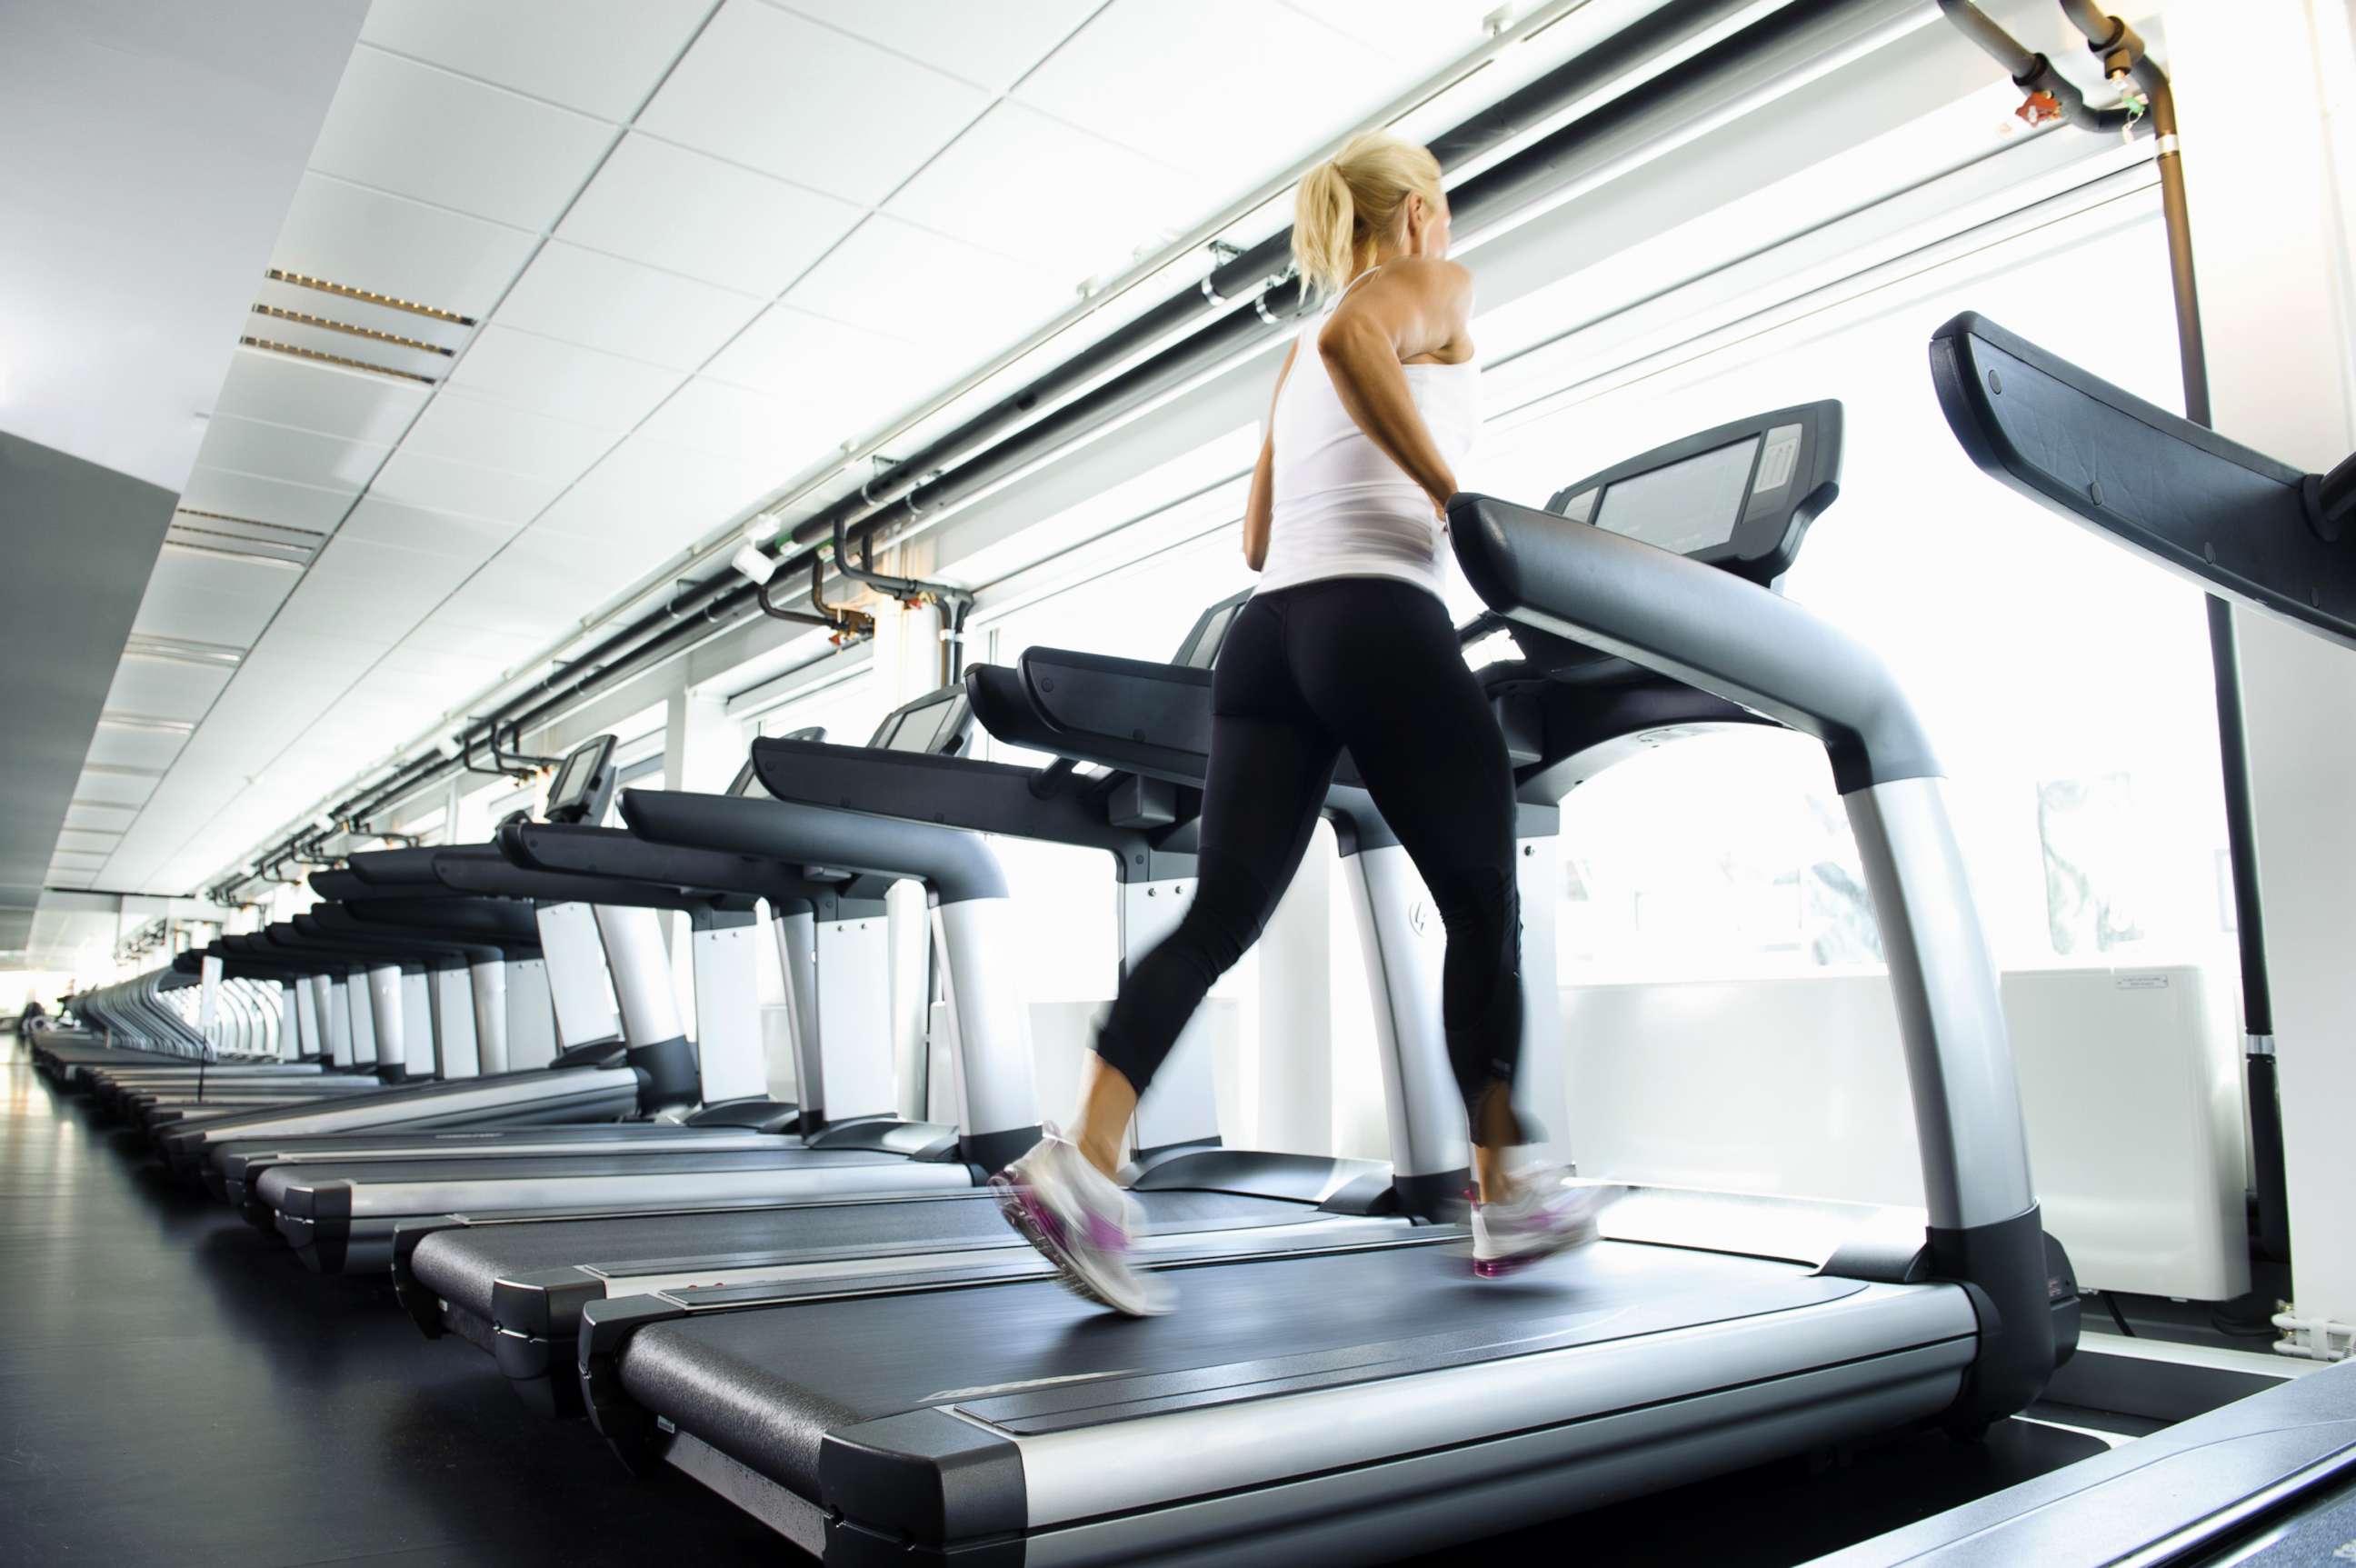 PHOTO: A woman works out on a treadmill.